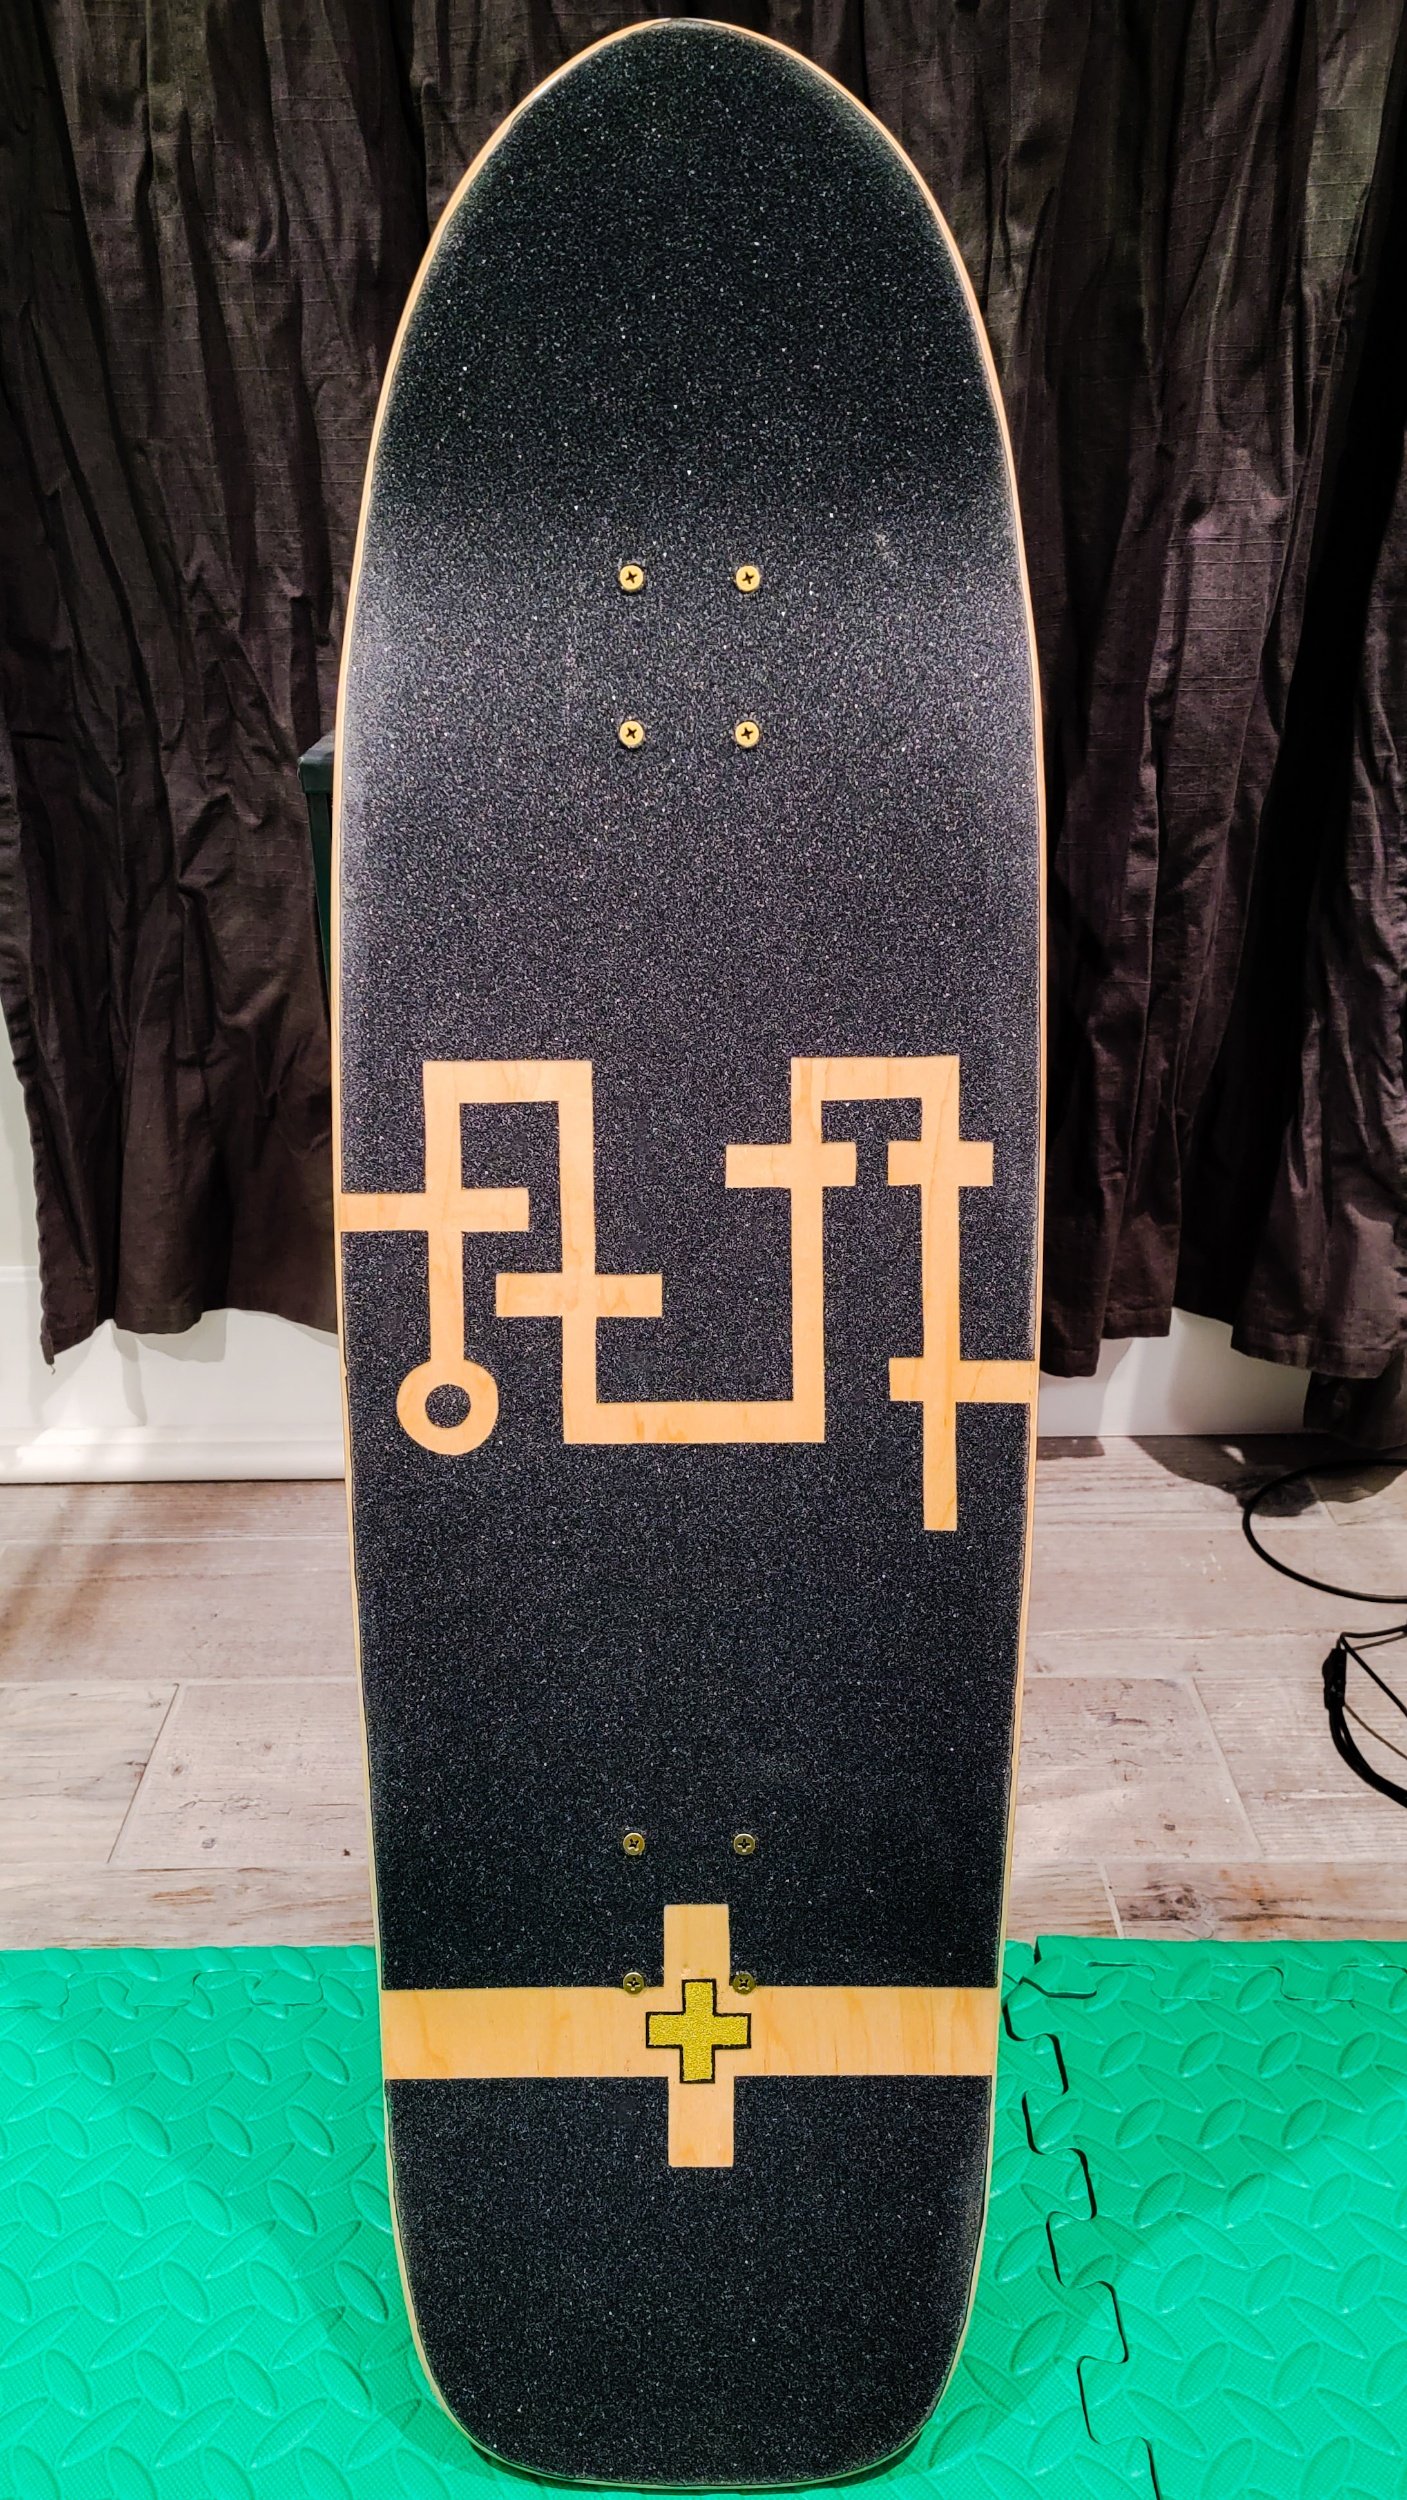   The Golden Path    Custom Cut Tunic Themed Grip Tape, Gold Hardware, The Holy Cross  